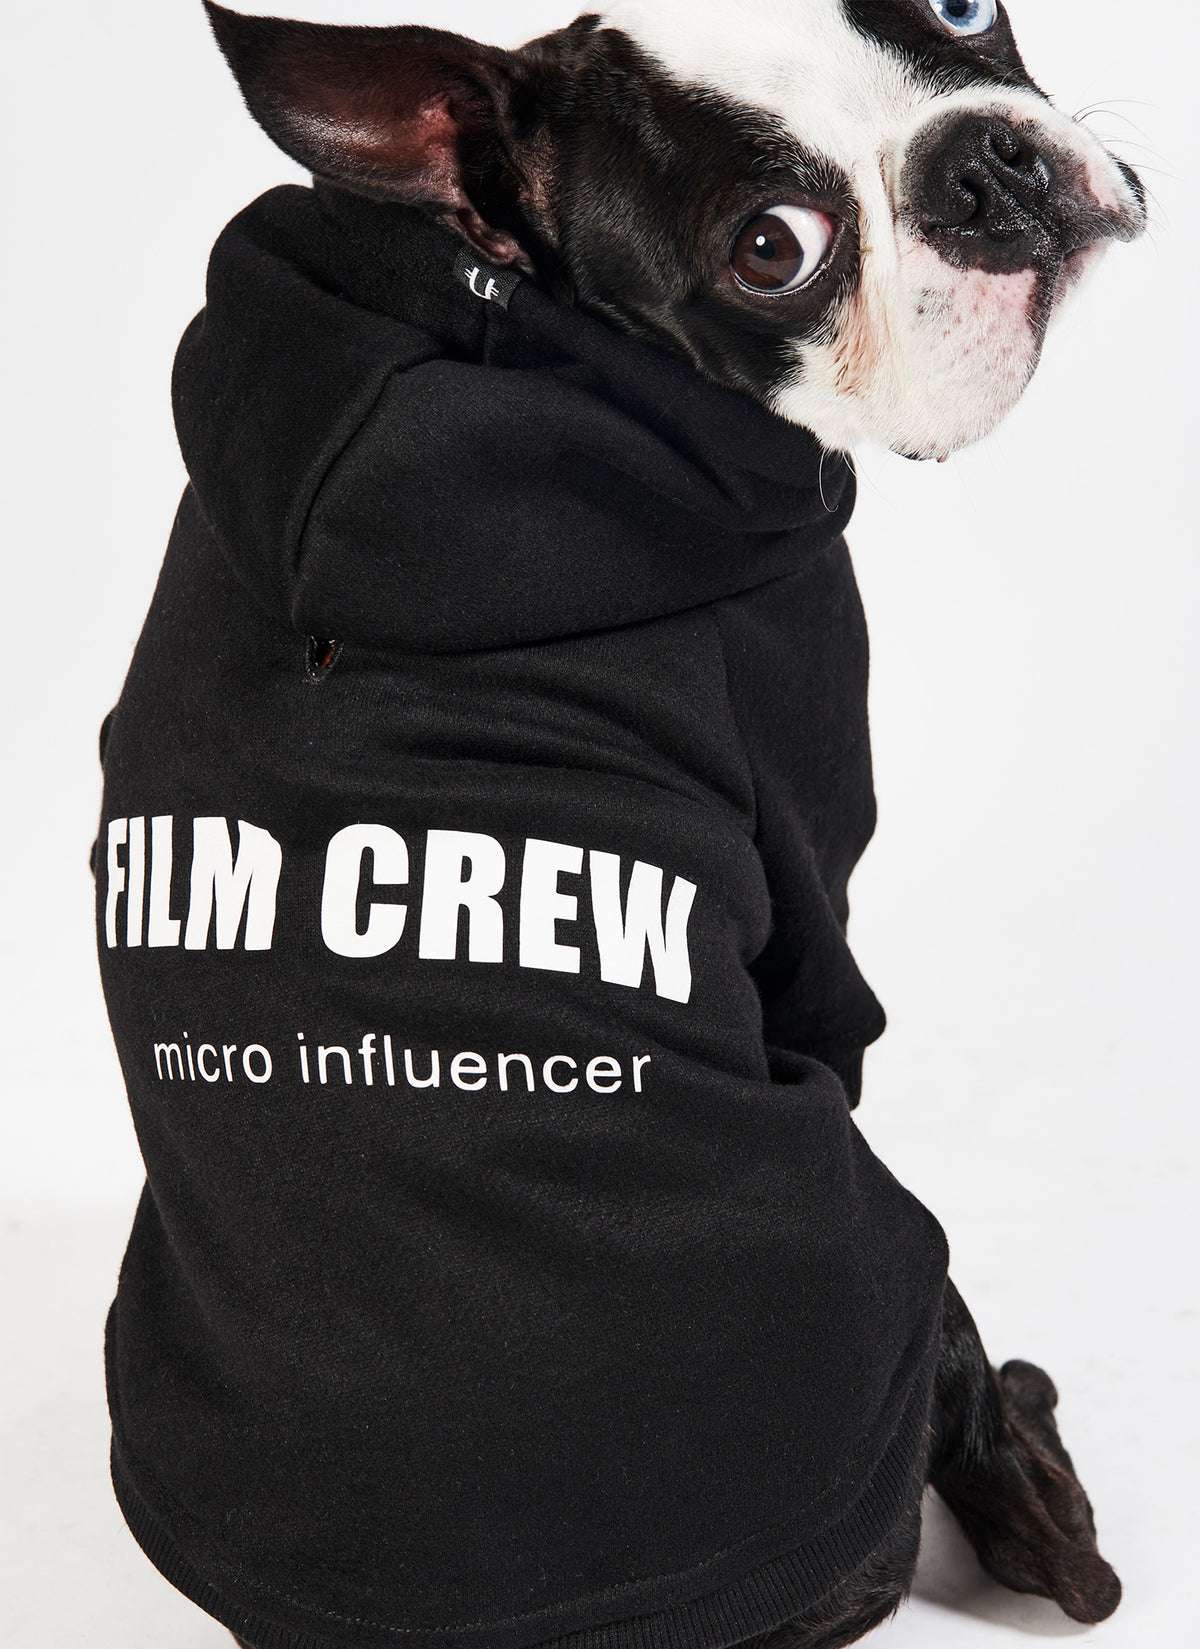 Cute Hooded Sweatshirt for dogs from Melbourne video production company, Enamoured Iris